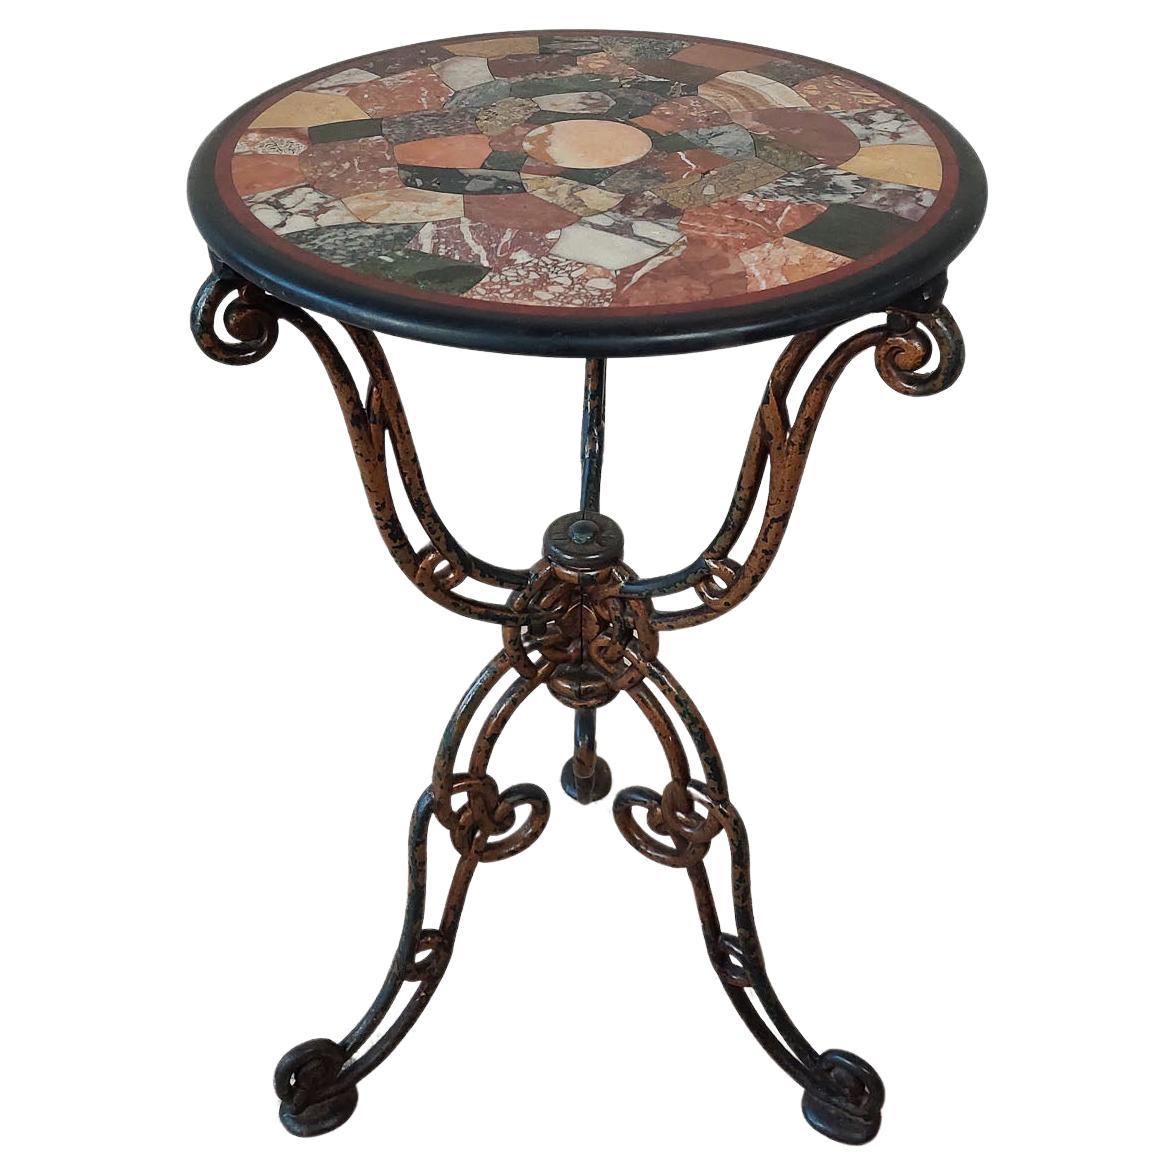 Cast iron round bistro table with inlaid (intarsia) marble mosaic